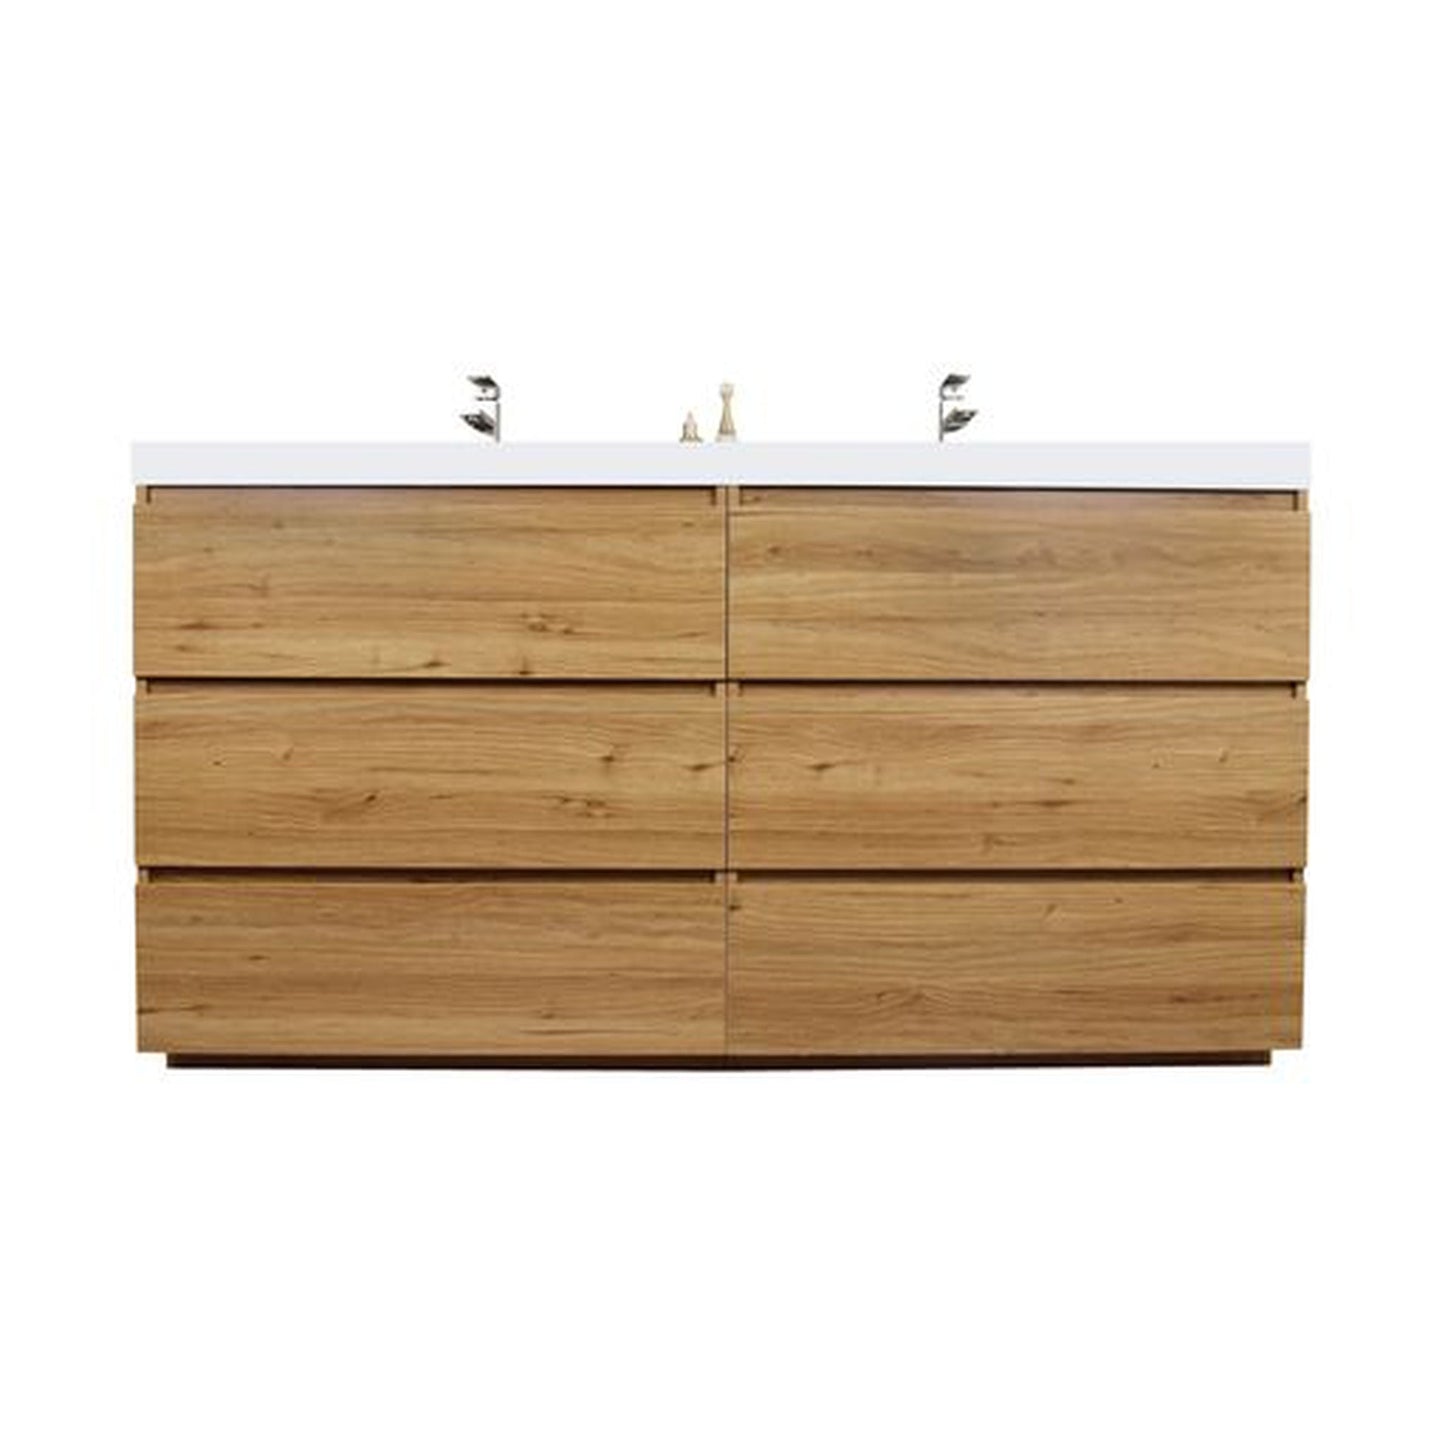 Moreno Bath Angeles 72" Nature Oak Freestanding Vanity With Double Reinforced White Acrylic Sinks